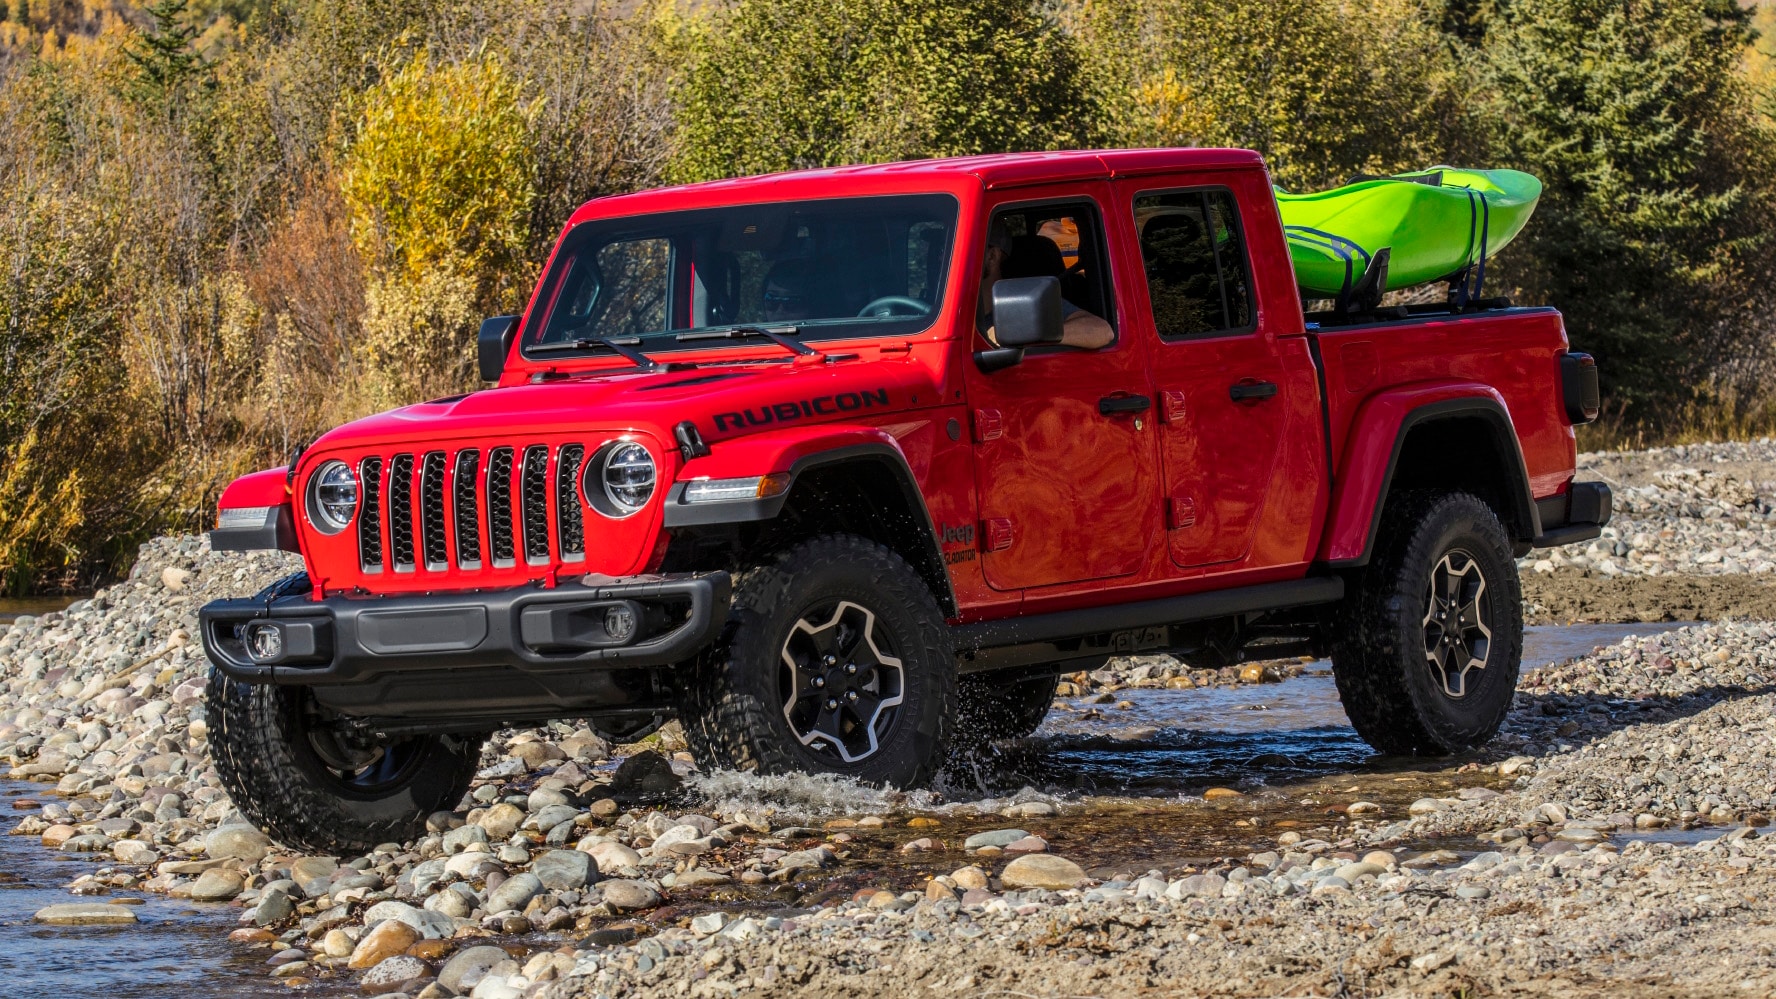 2021 Jeep Gladiator Prices, Reviews, and Photos - MotorTrend